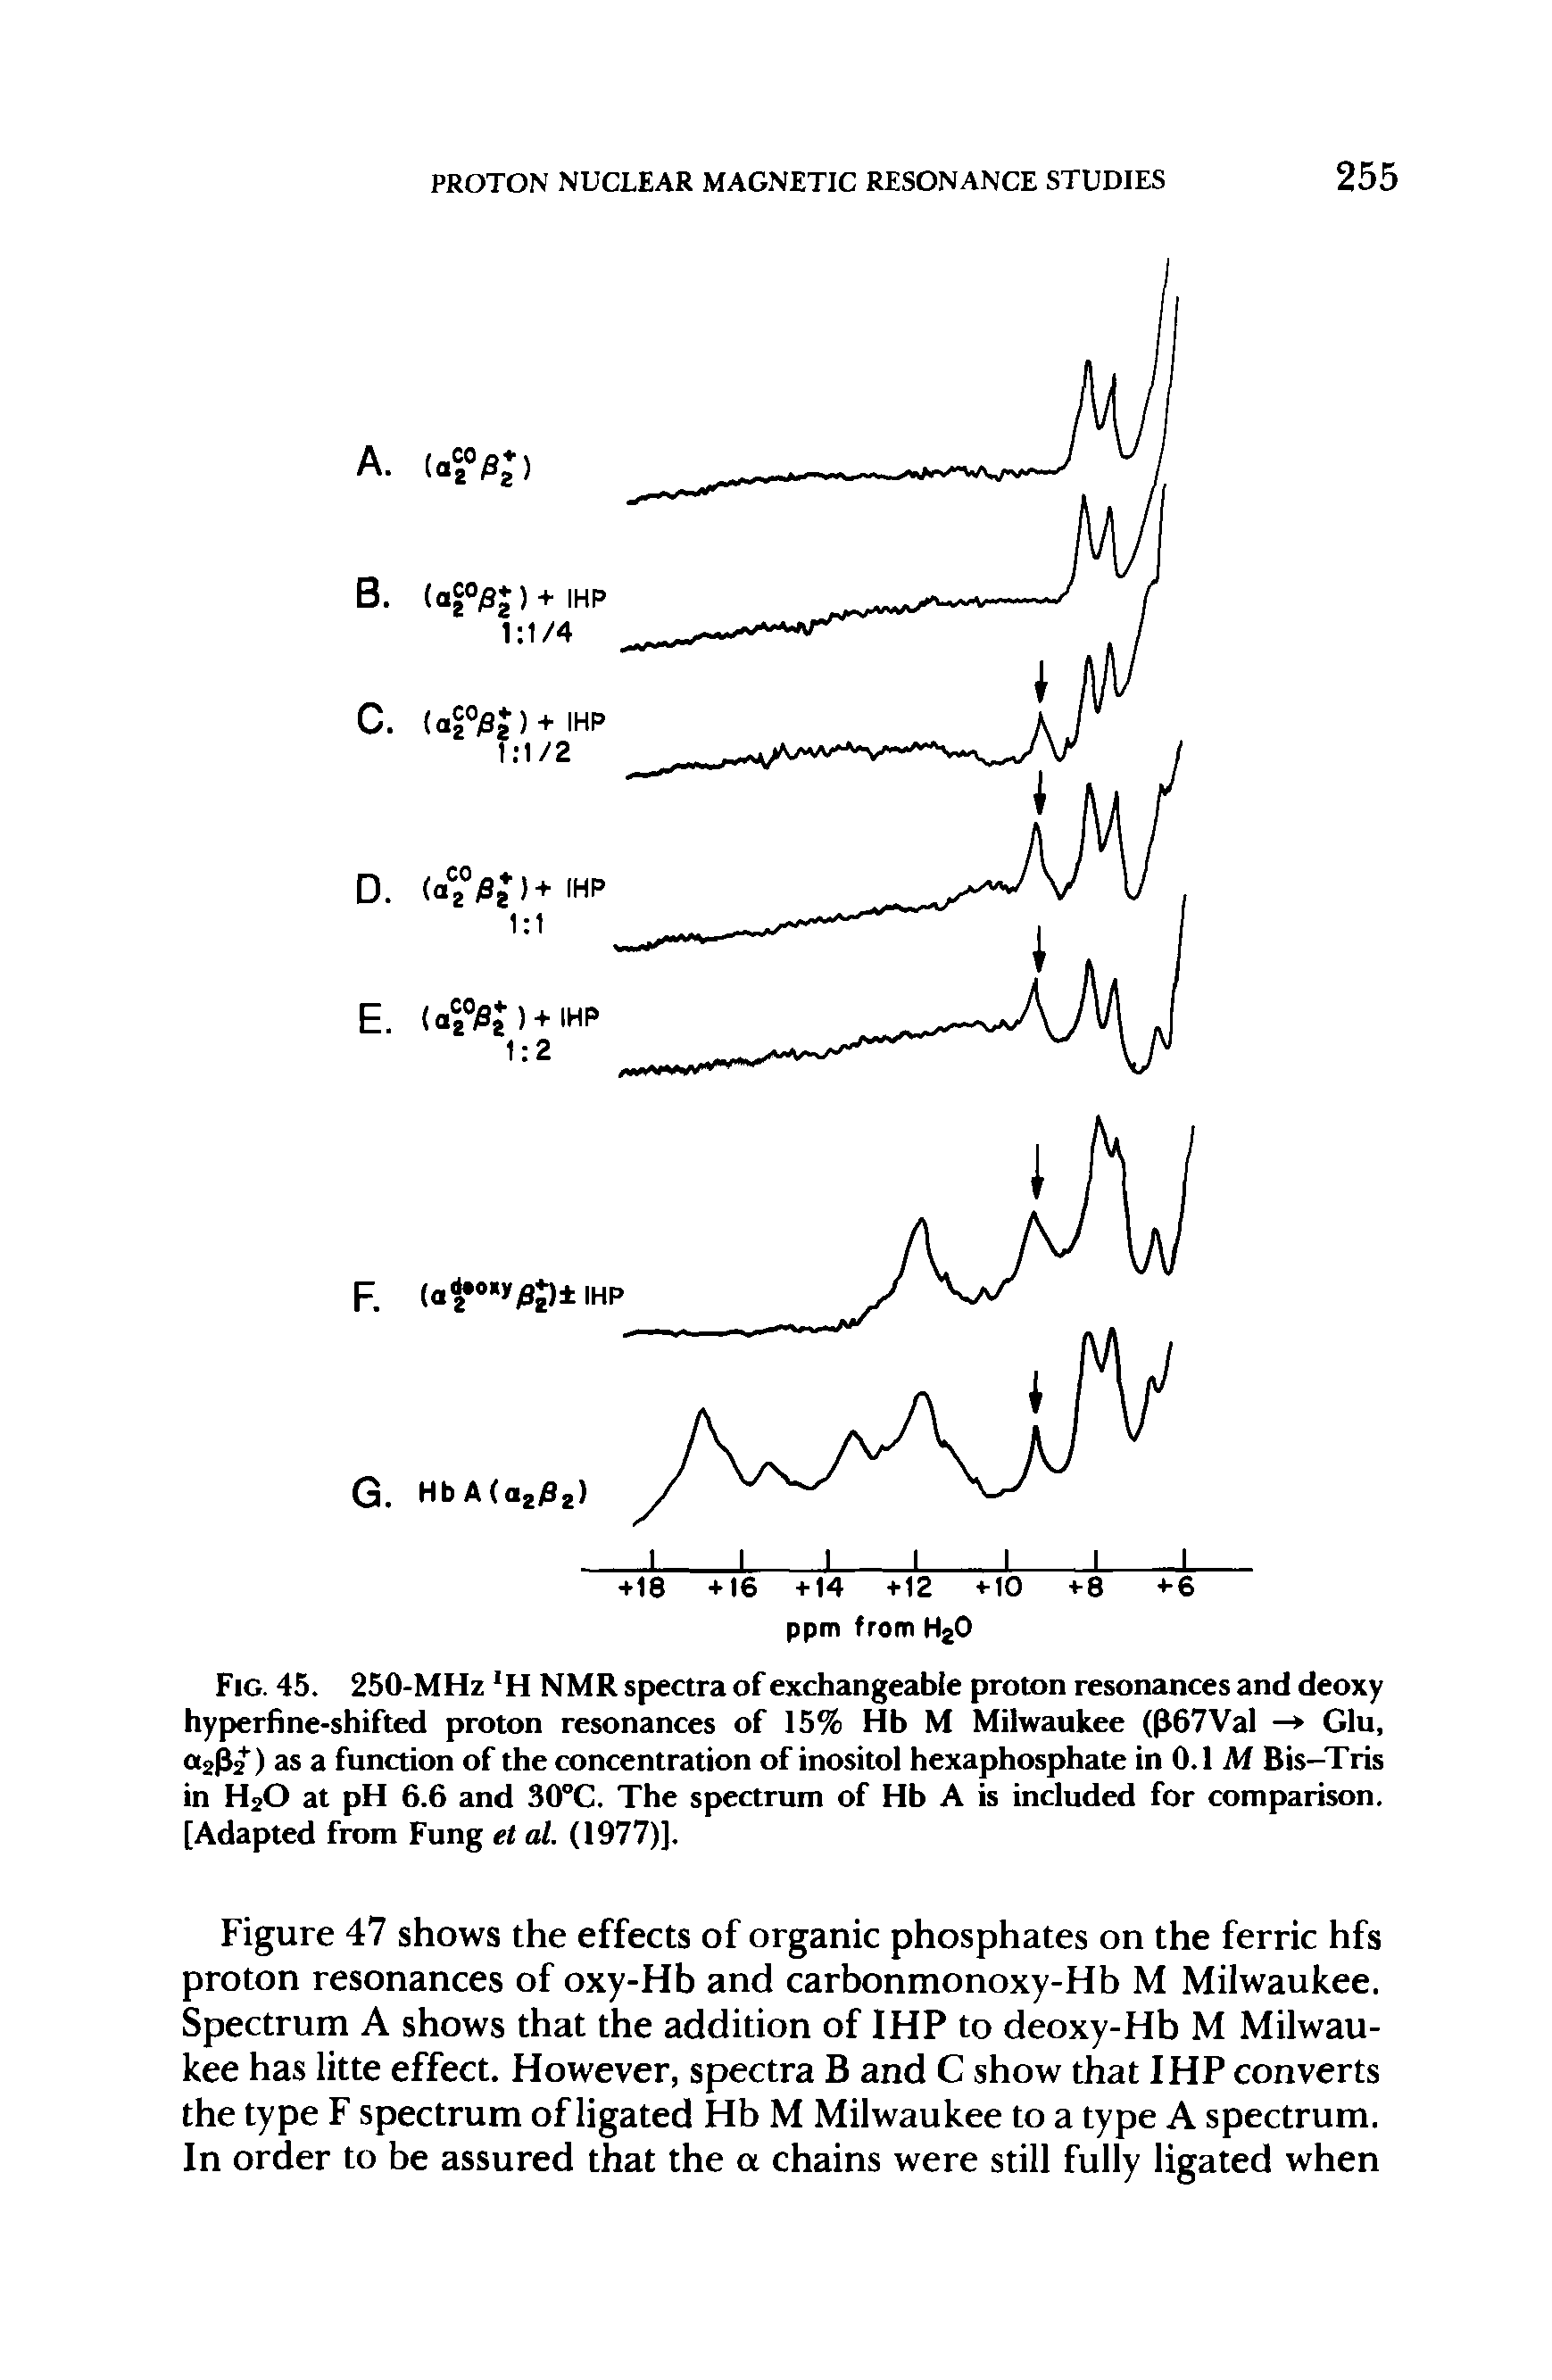 Fig. 45. 250-MHz H NMR spectra of exchangeable proton resonances and deoxy hyperfine-shifted proton resonances of 15% Hb M Milwaukee (p67Val — Glu, a2p2 ) as a function of the concentration of inositol hexaphosphate in 0.1 M Bis-Tris in H20 at pH 6.6 and 30°C. The spectrum of Hb A is included for comparison. [Adapted from Fung et al. (1977)].